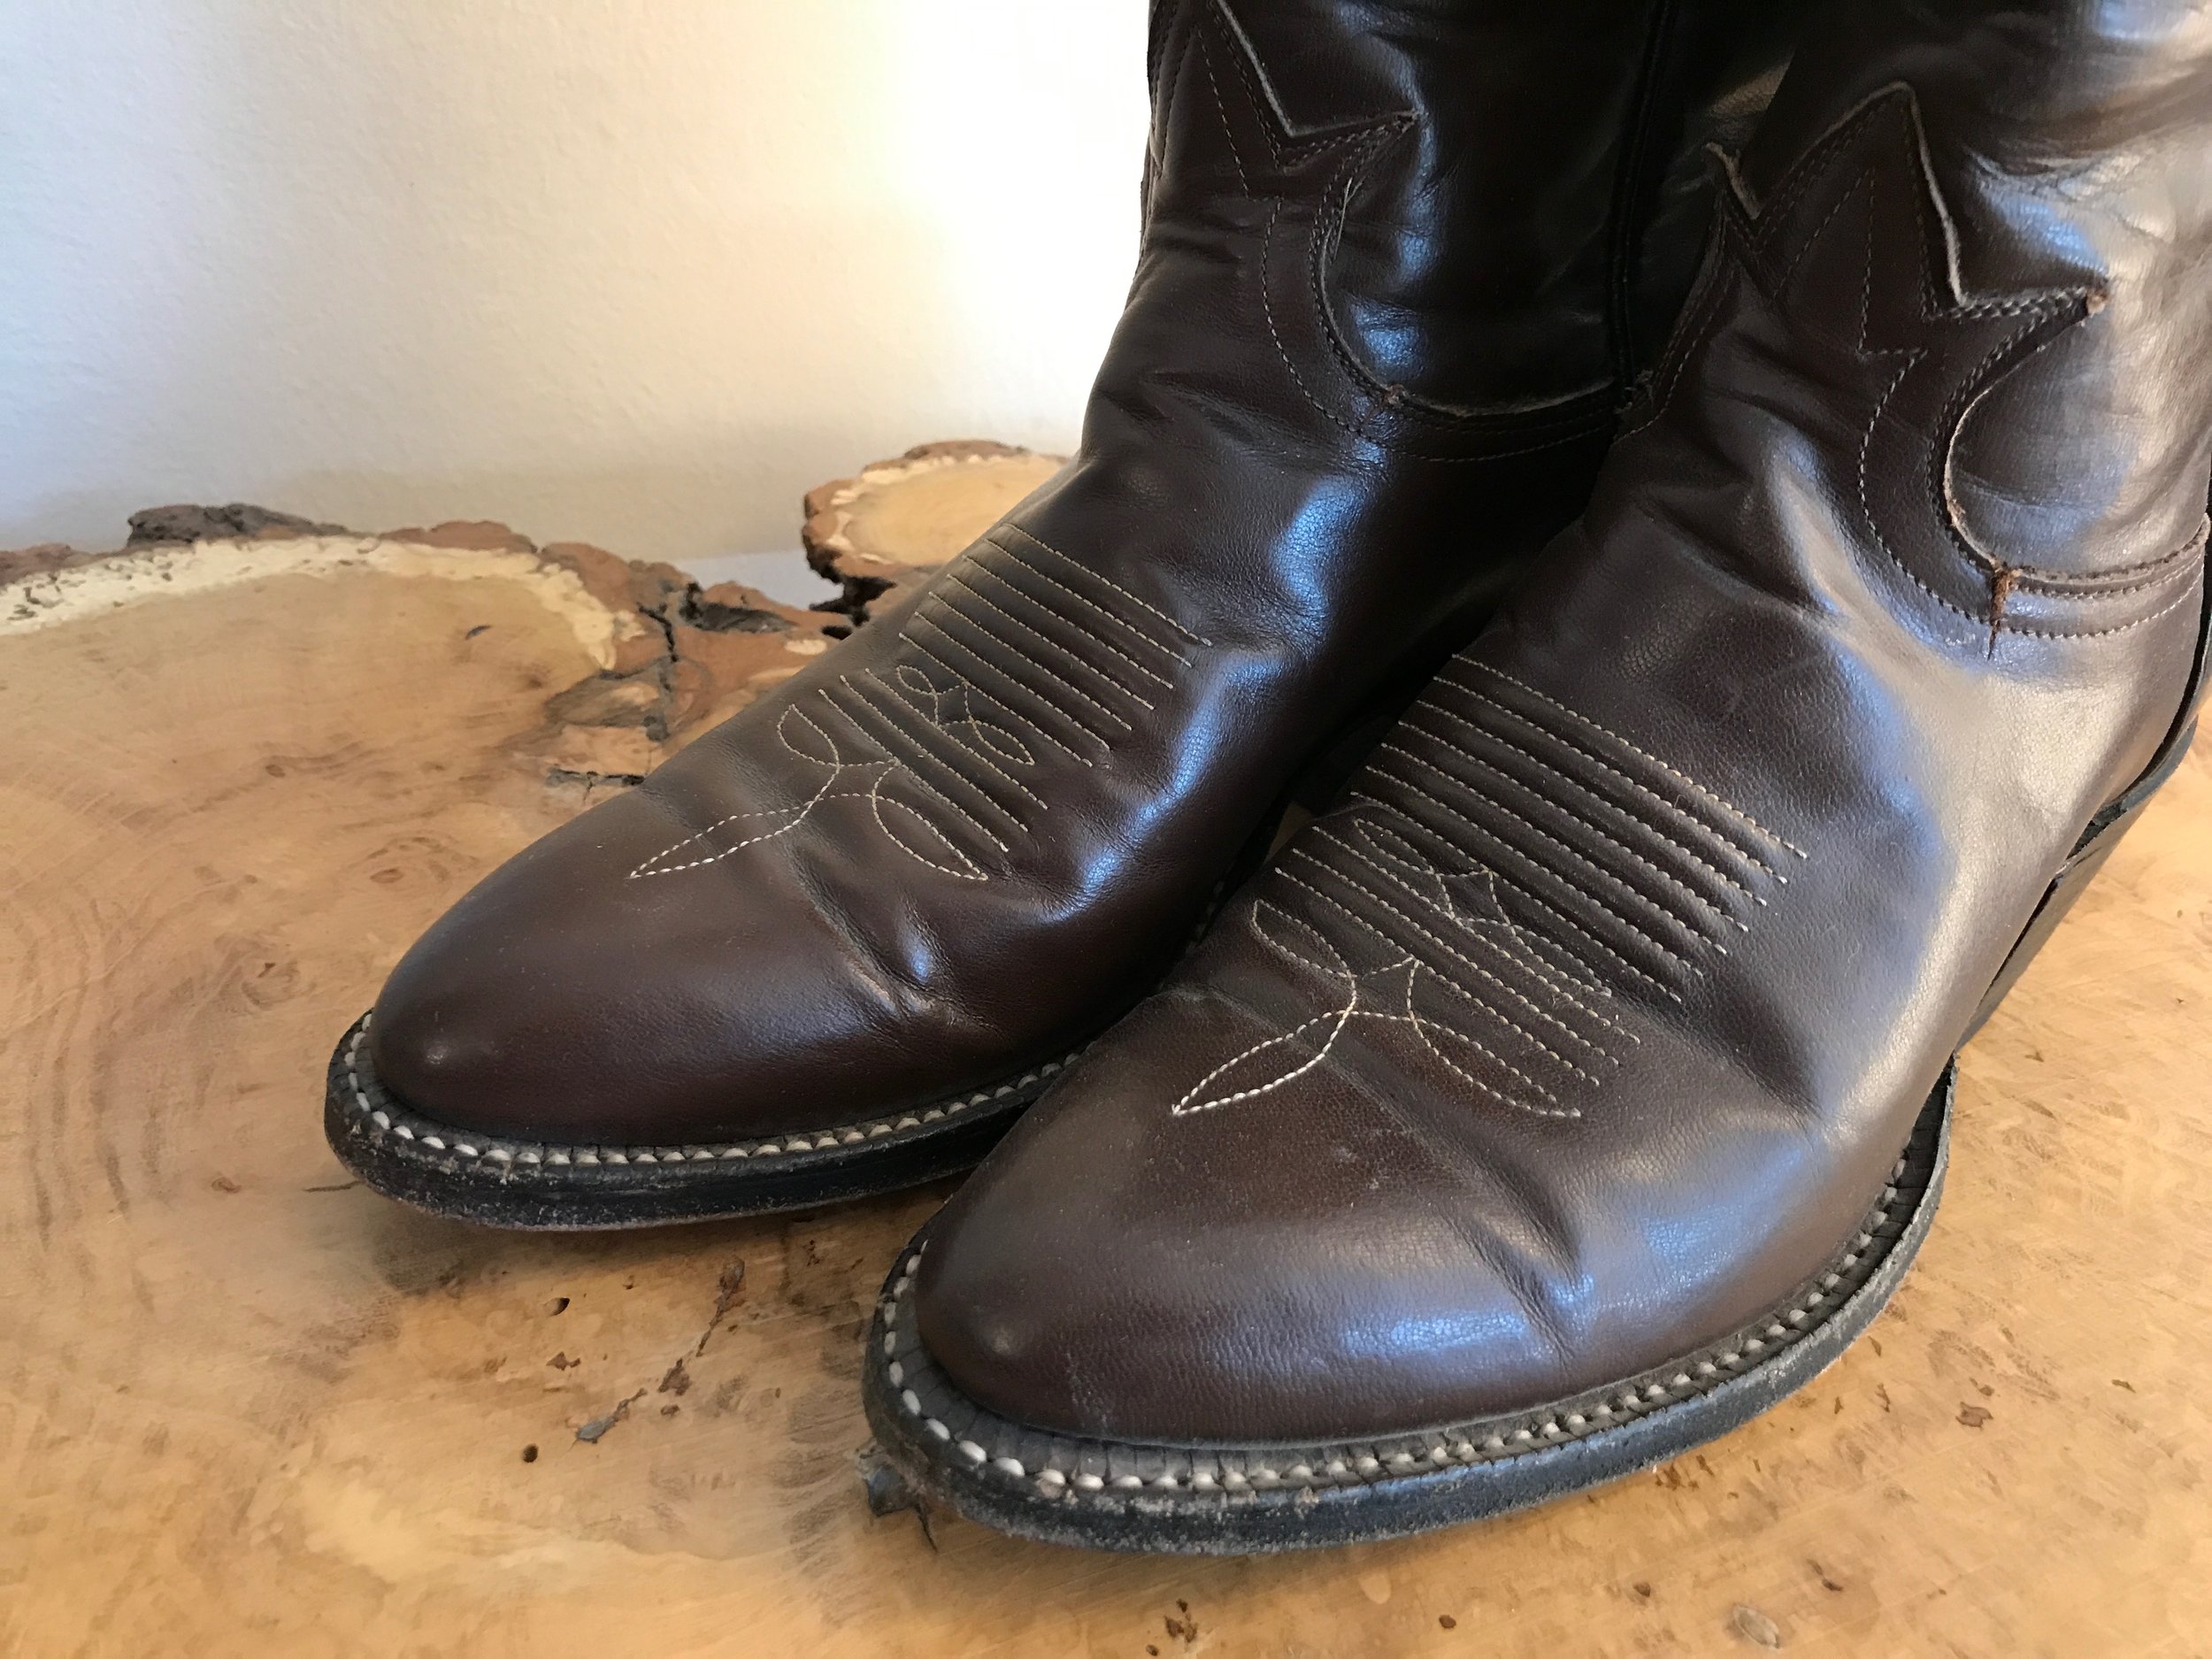 Tall Tony Lamas with Western Stitching — The Western Wanderer